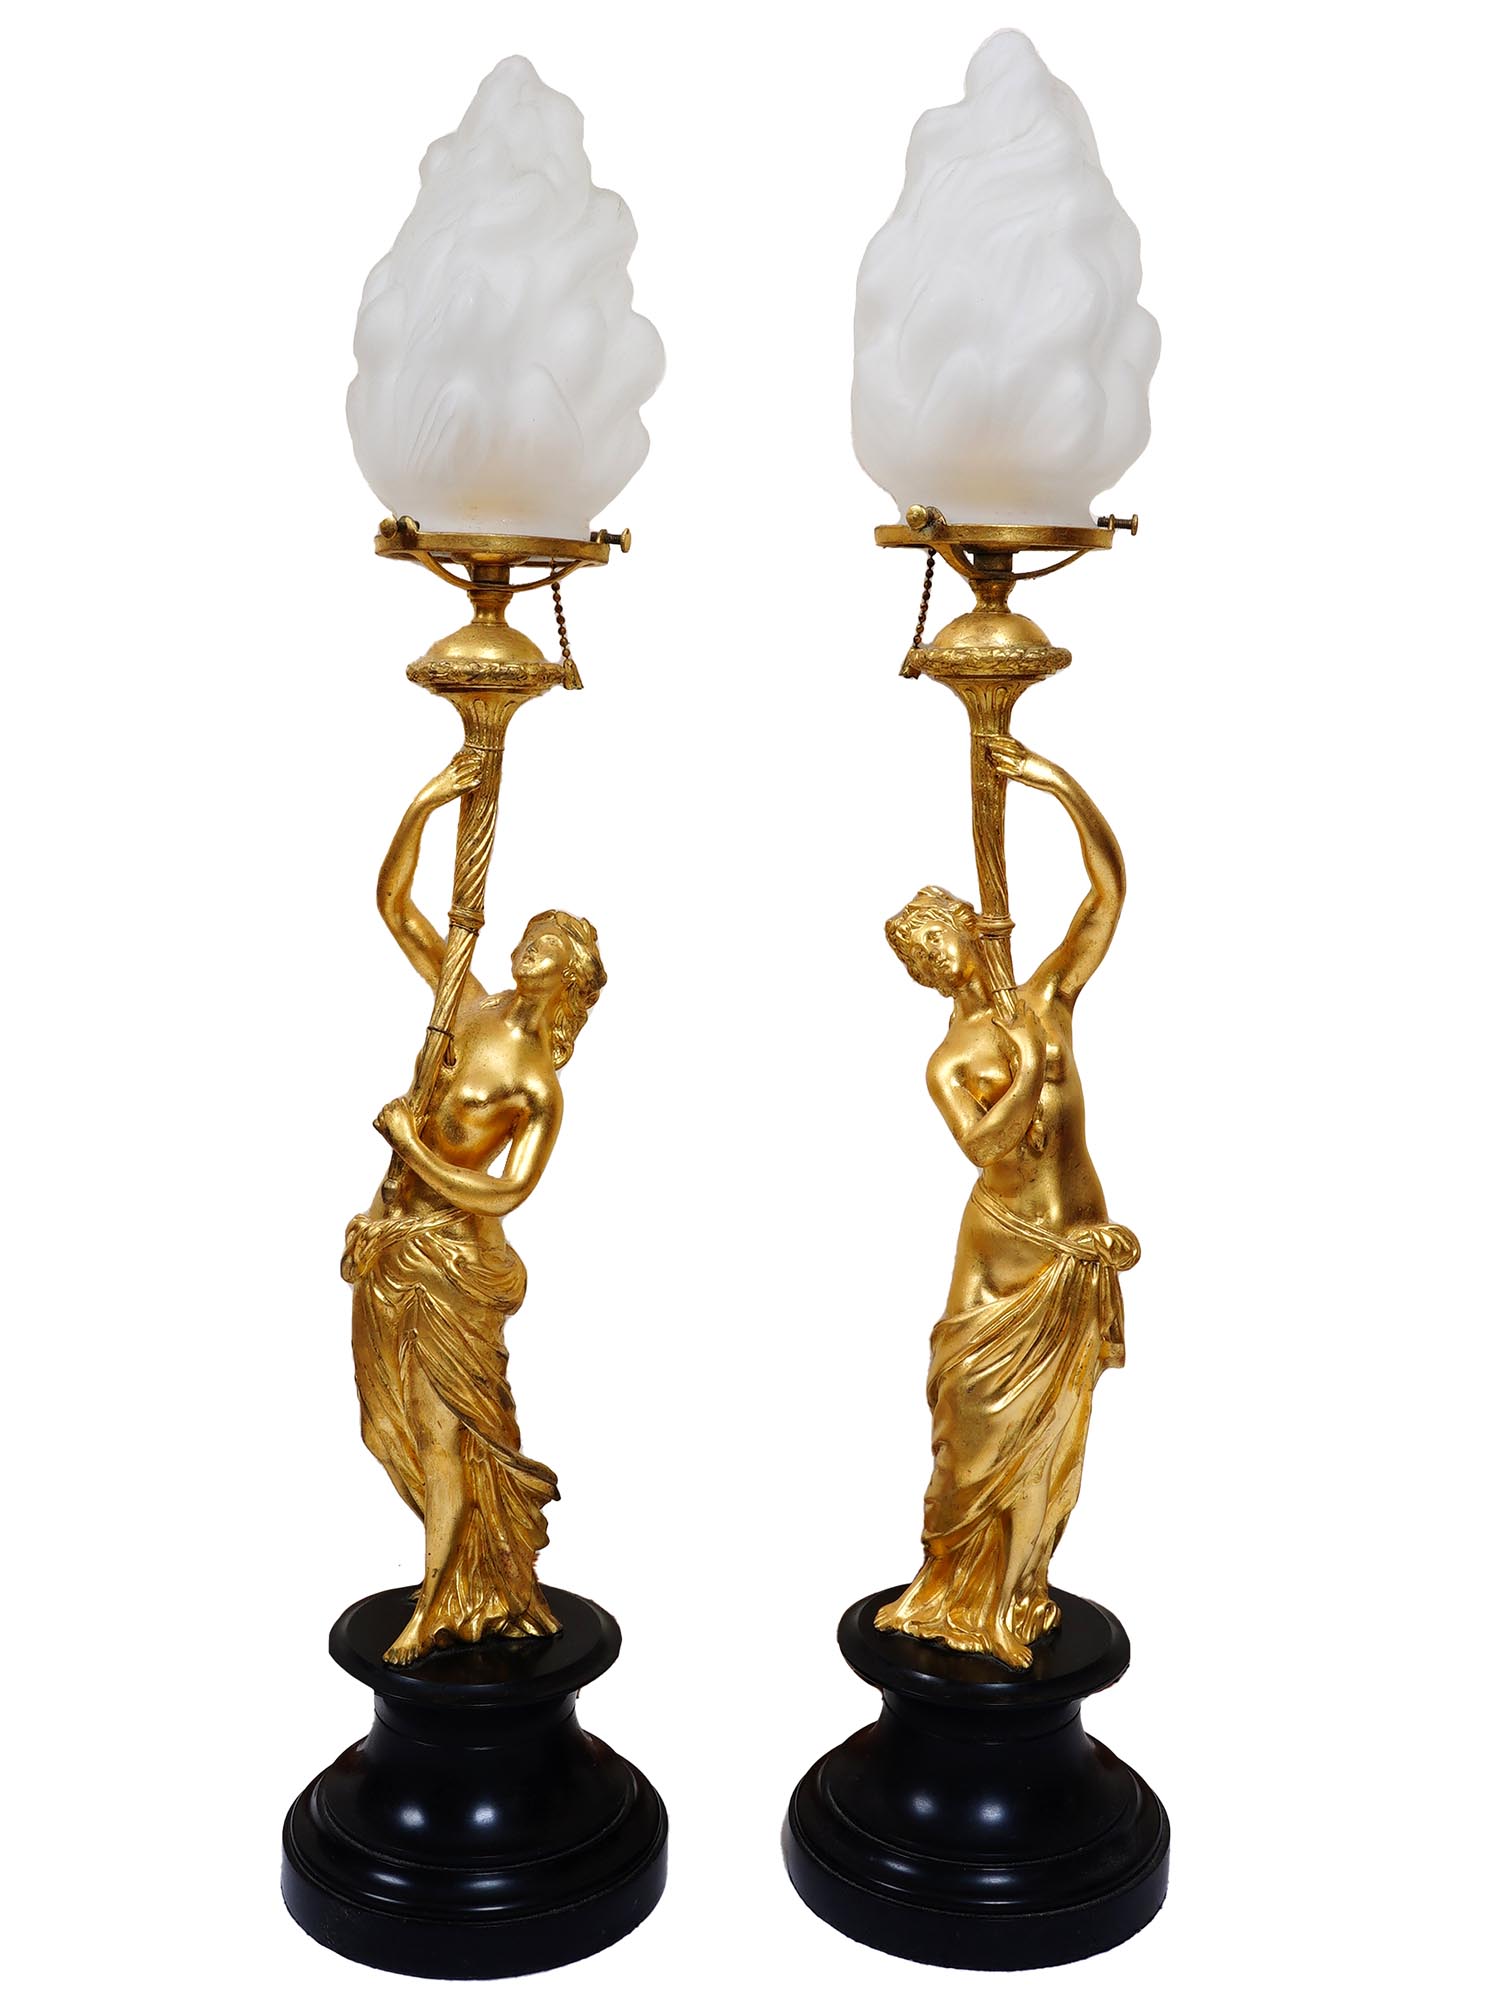 ANTIQUE FRENCH GILT BRONZE LAMPS BY AUGUSTE MOREAU PIC-0